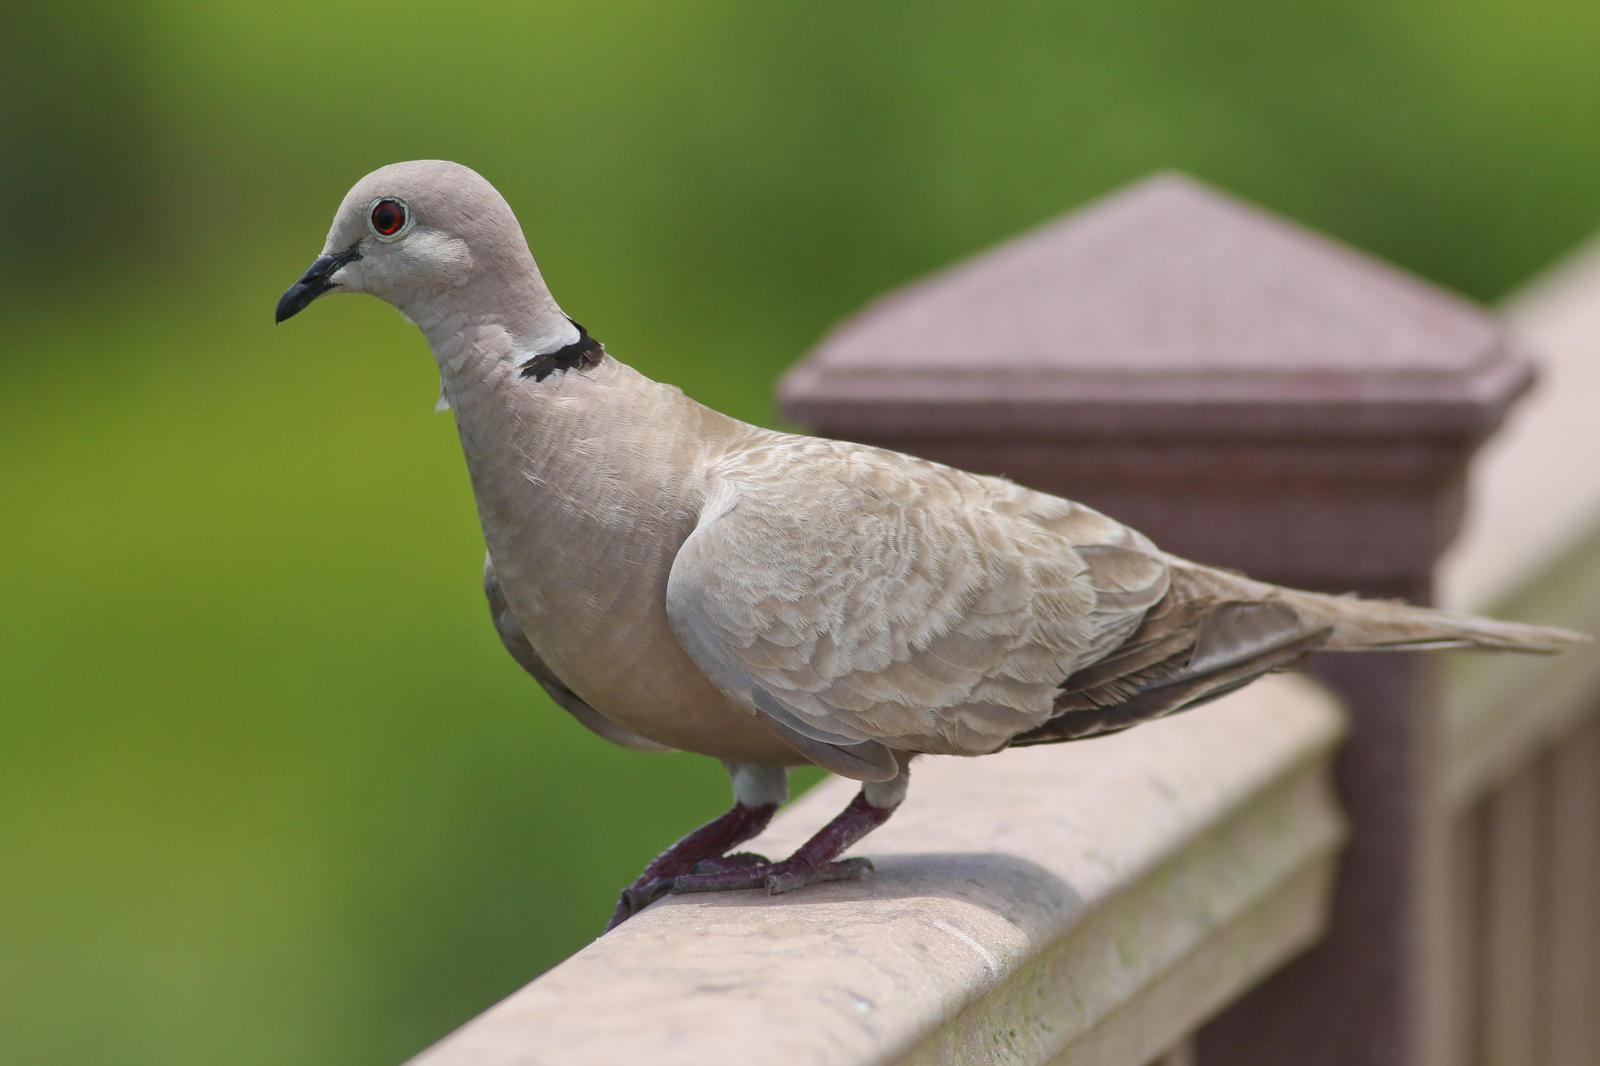 Eurasian Collared-Dove Photo by Tom Ford-Hutchinson